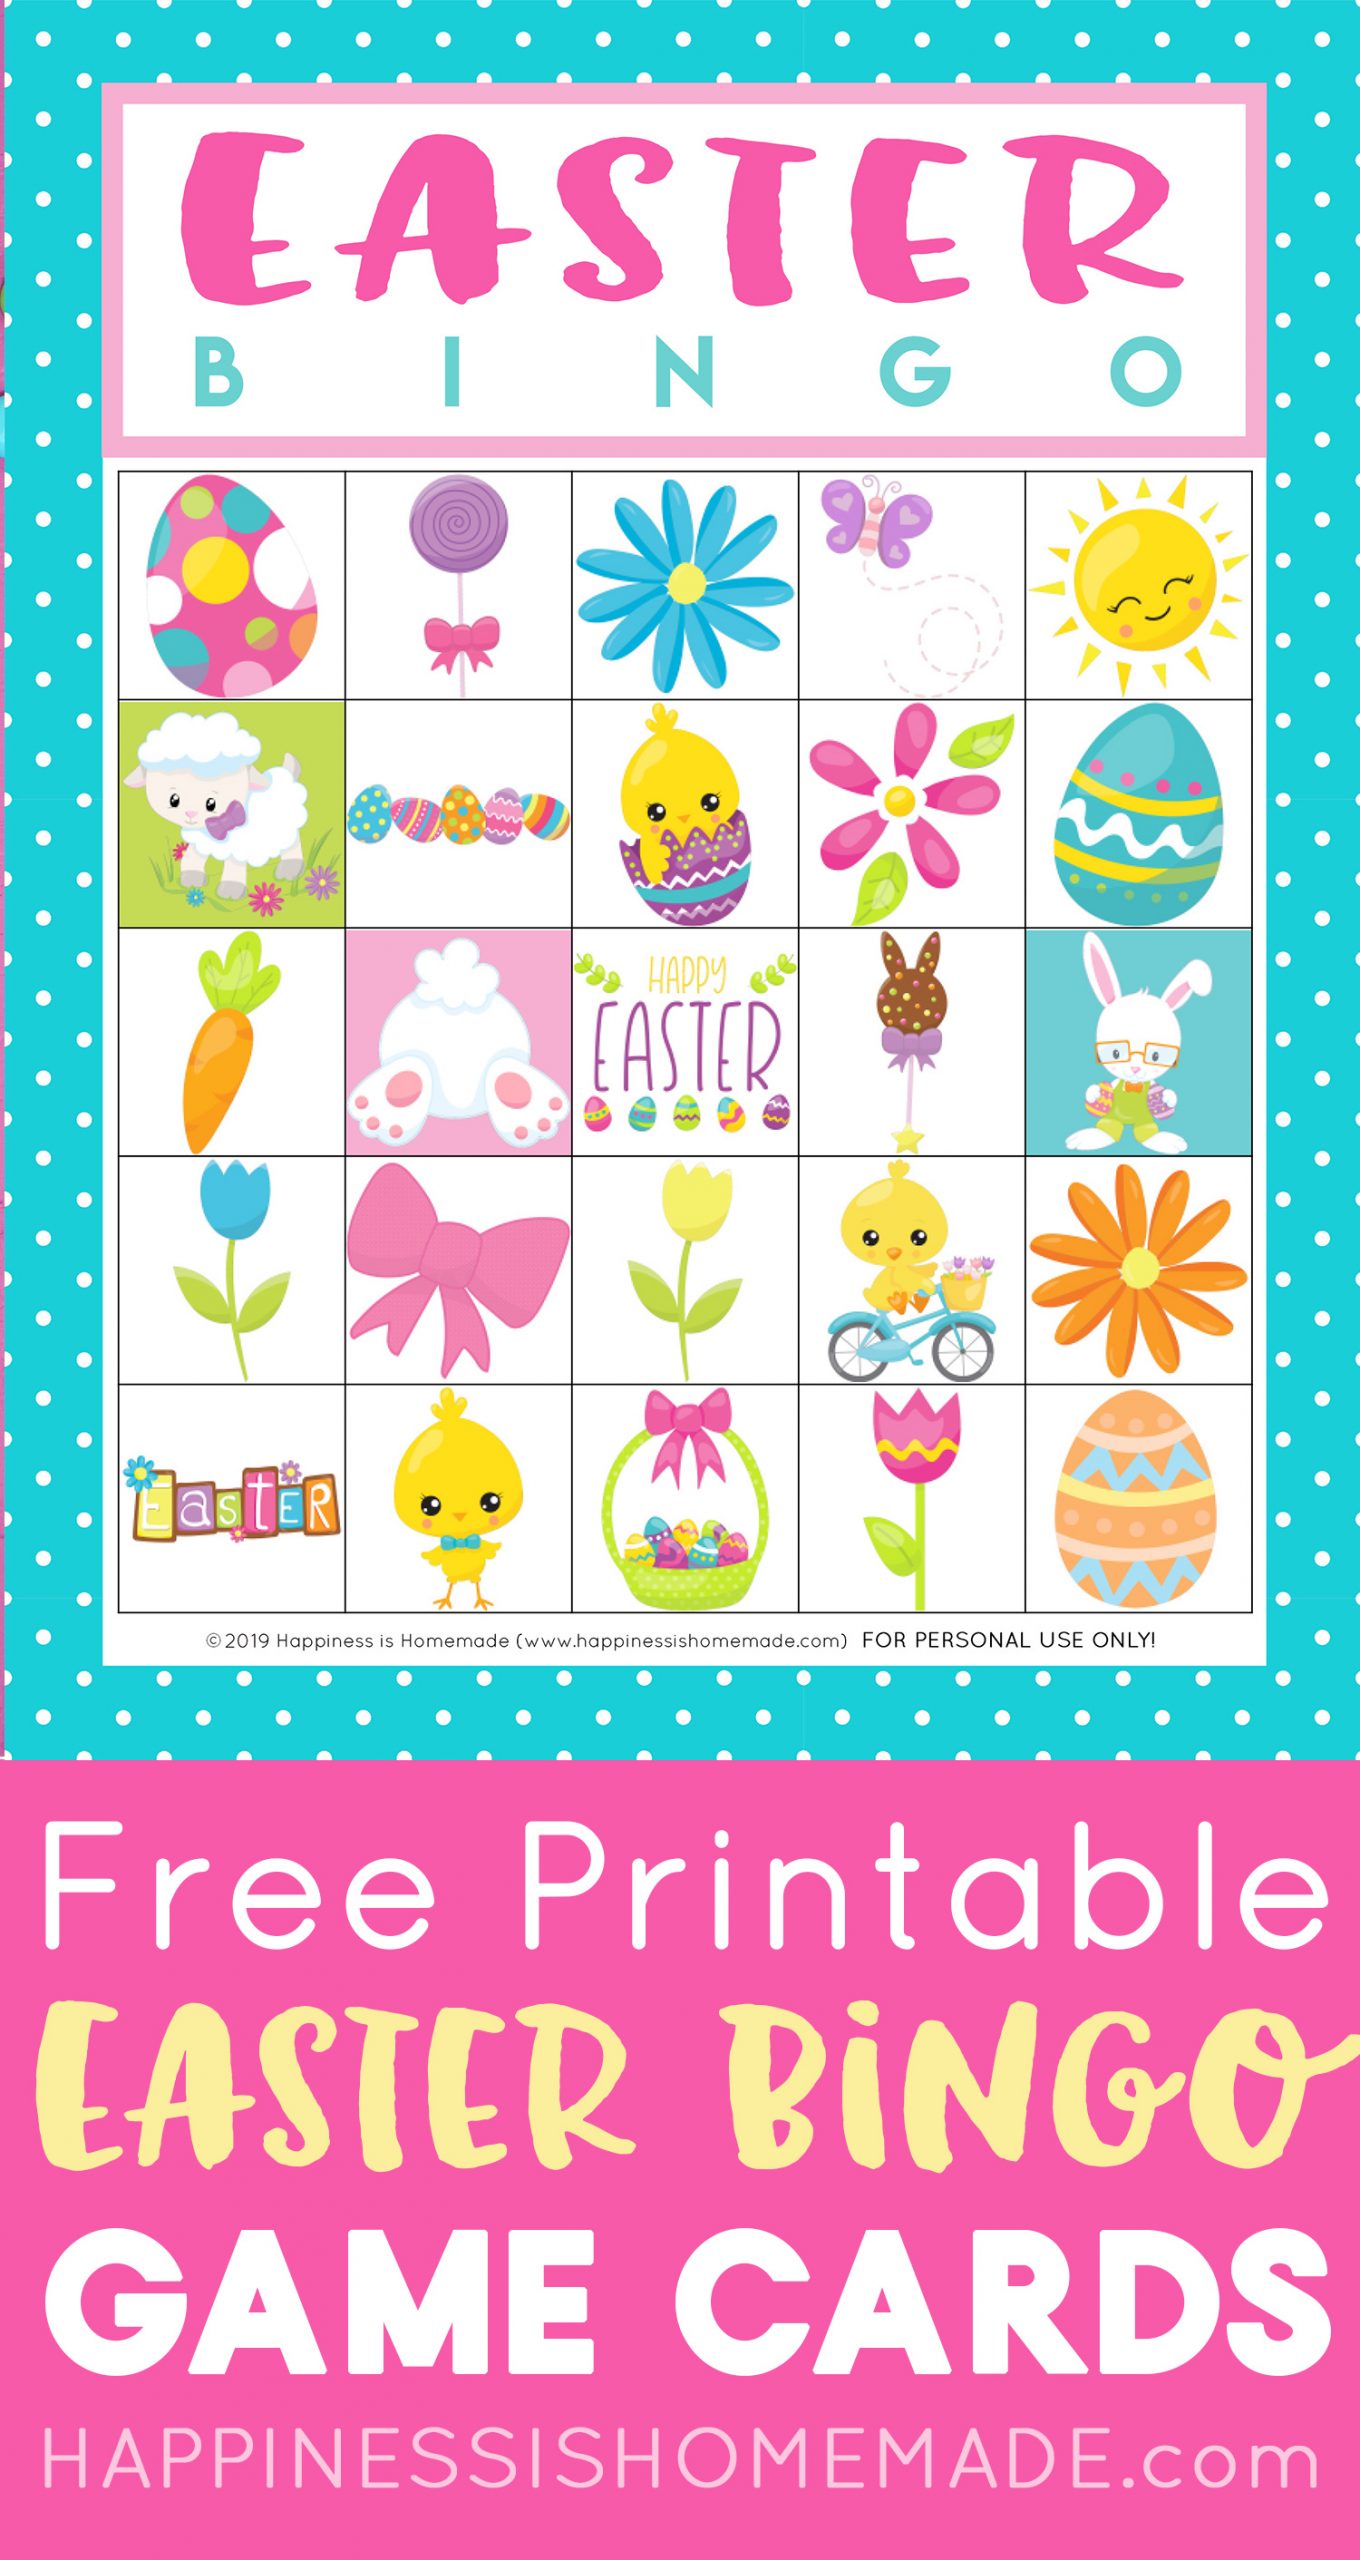 FREE Printable Easter Bingo Game Cards Happiness Is Homemade